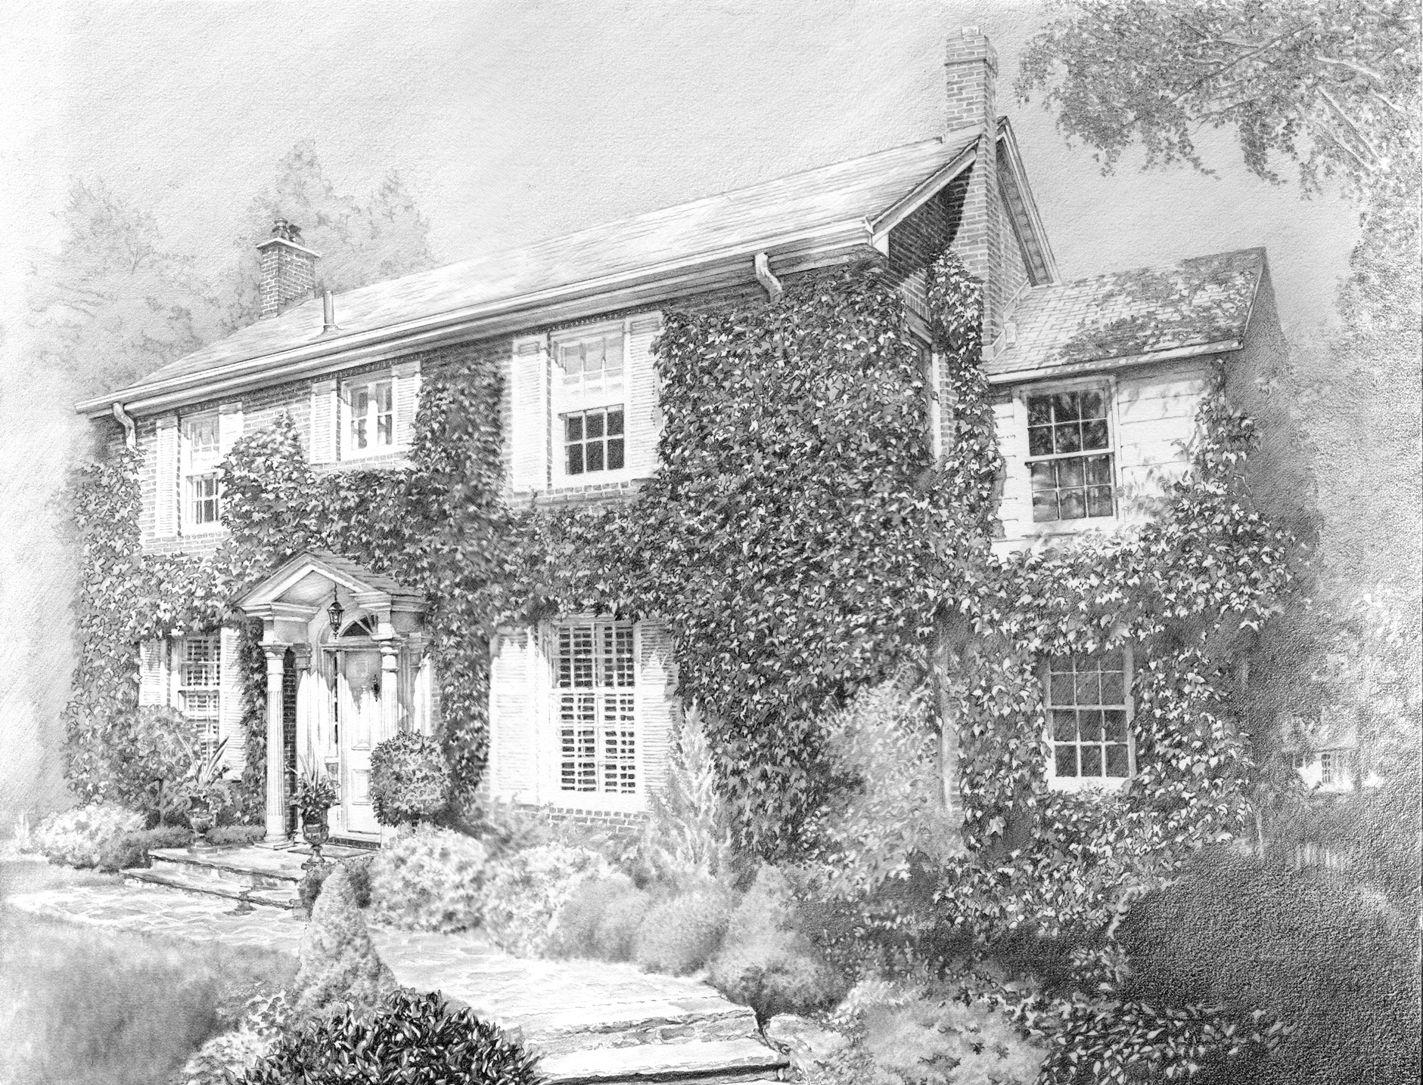 Pencil Art Landscape Wallpapers Top Free Pencil Art Landscape Backgrounds Wallpaperaccess Nature pencil sketch drawings and scenic house sketchbabermughal | drawing scenery, nature. pencil art landscape wallpapers top